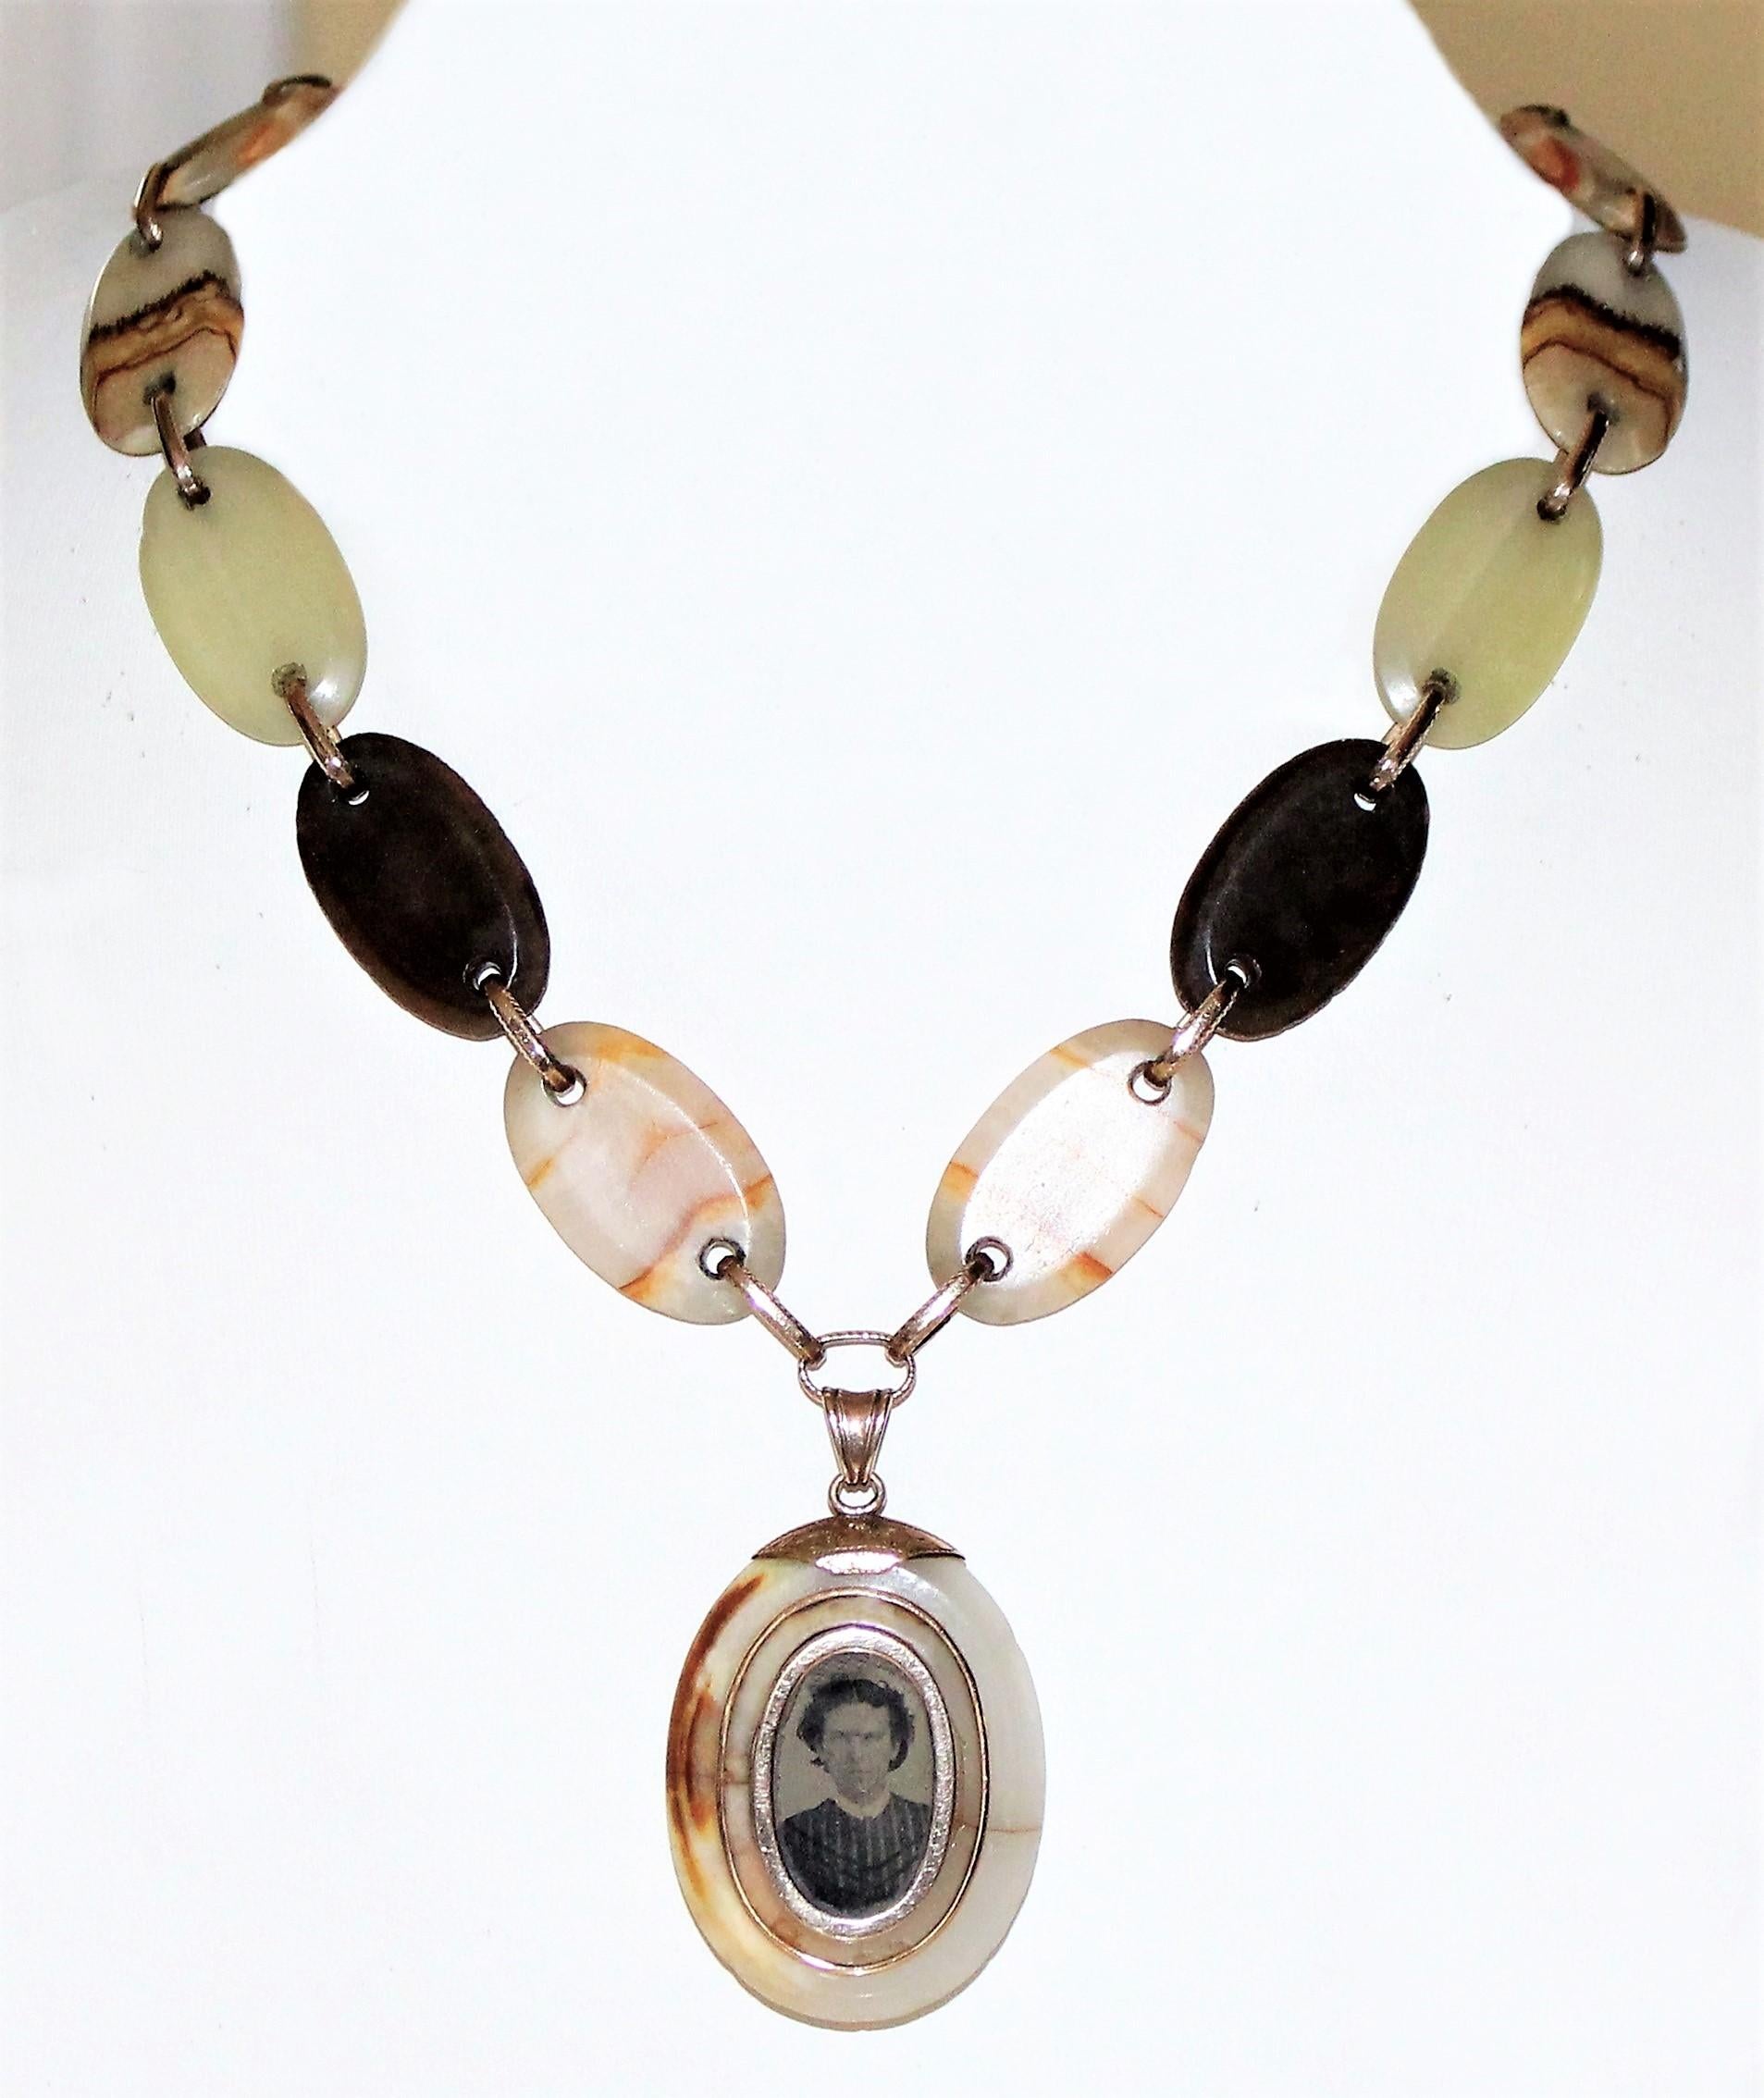 Circa 1850s Victorian multicolor oval agate link necklace and locket with heavy 14K rolled-gold links, findings, and shield-shape cartouche.  The necklace measures 18